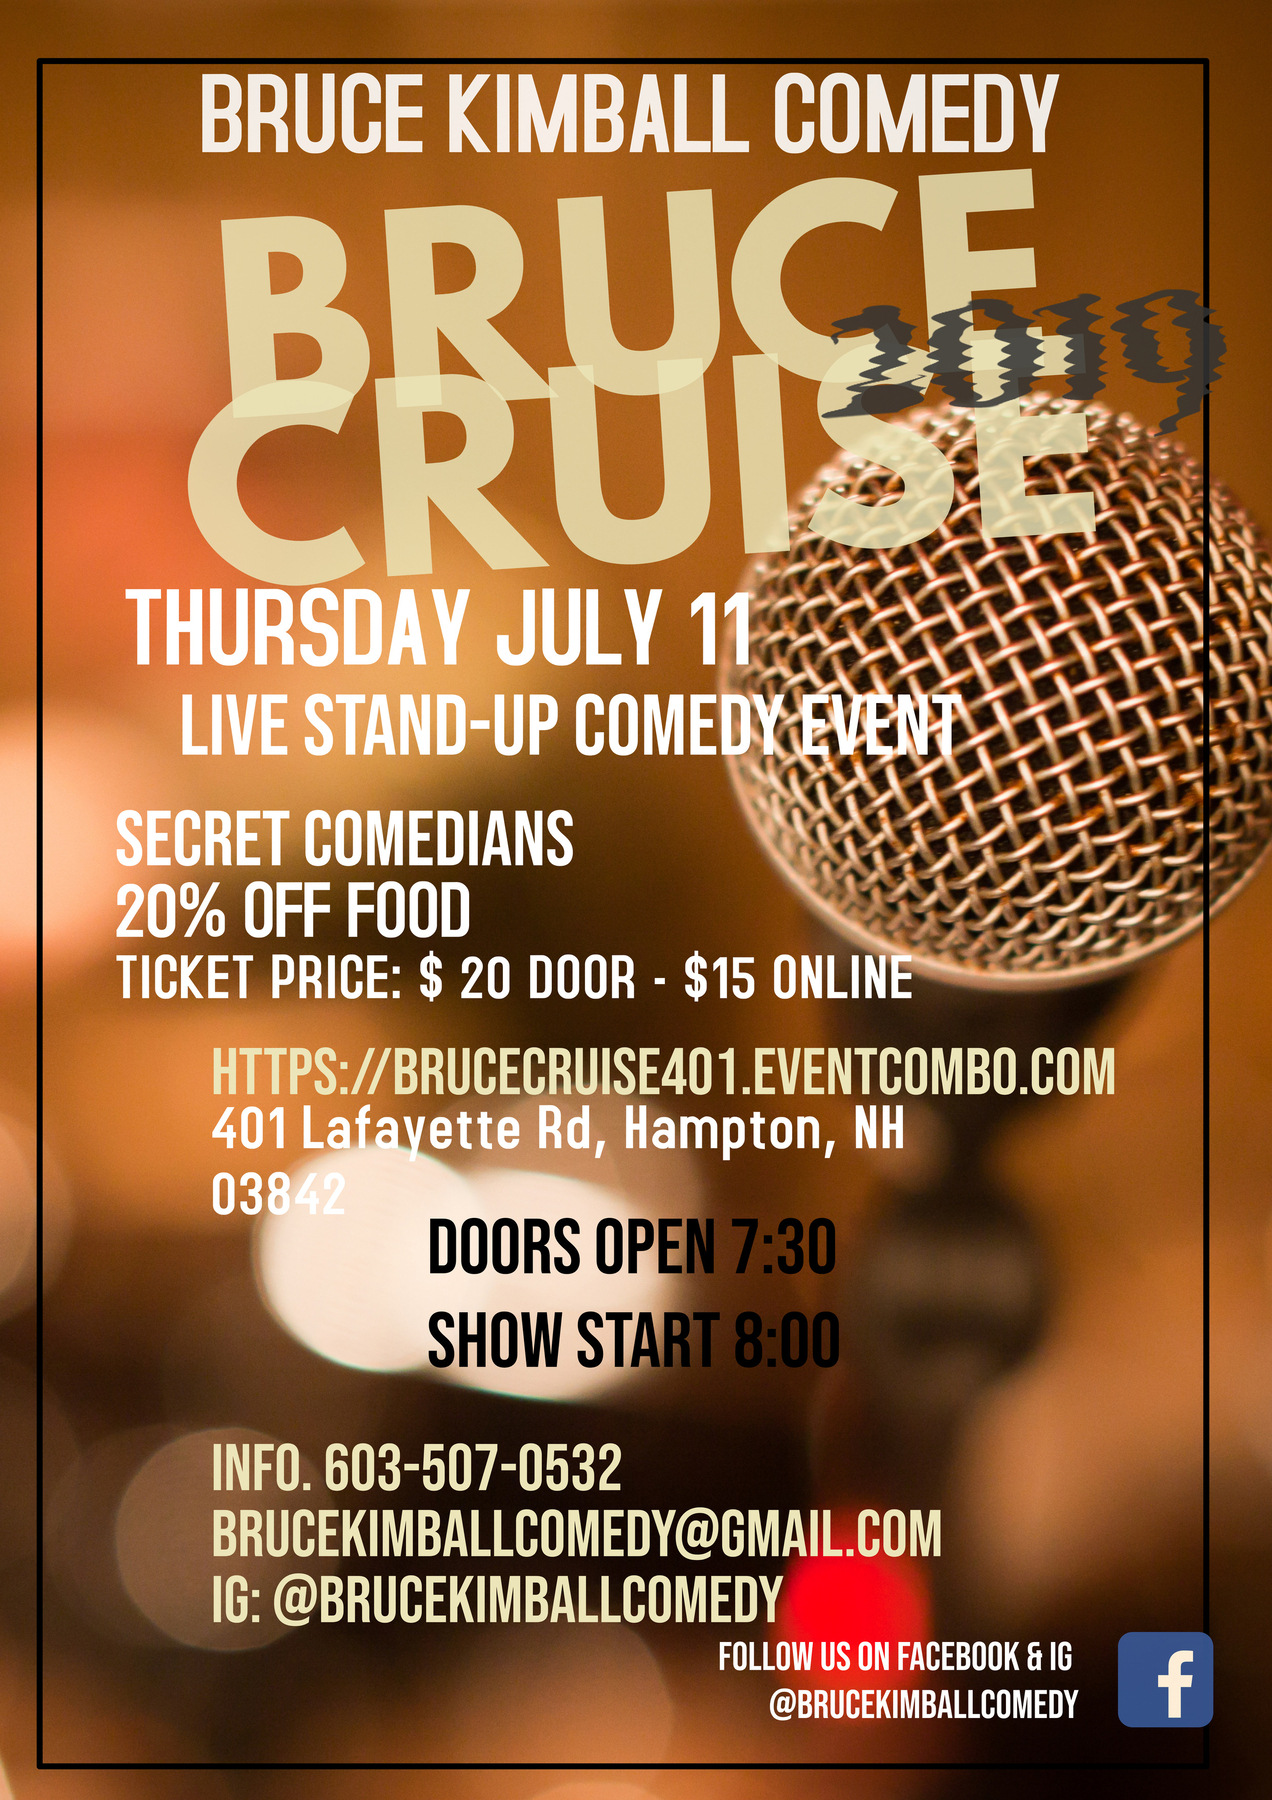 BRUCE KIMBALL COMEDY pres. BRUCE CRUISE 2019